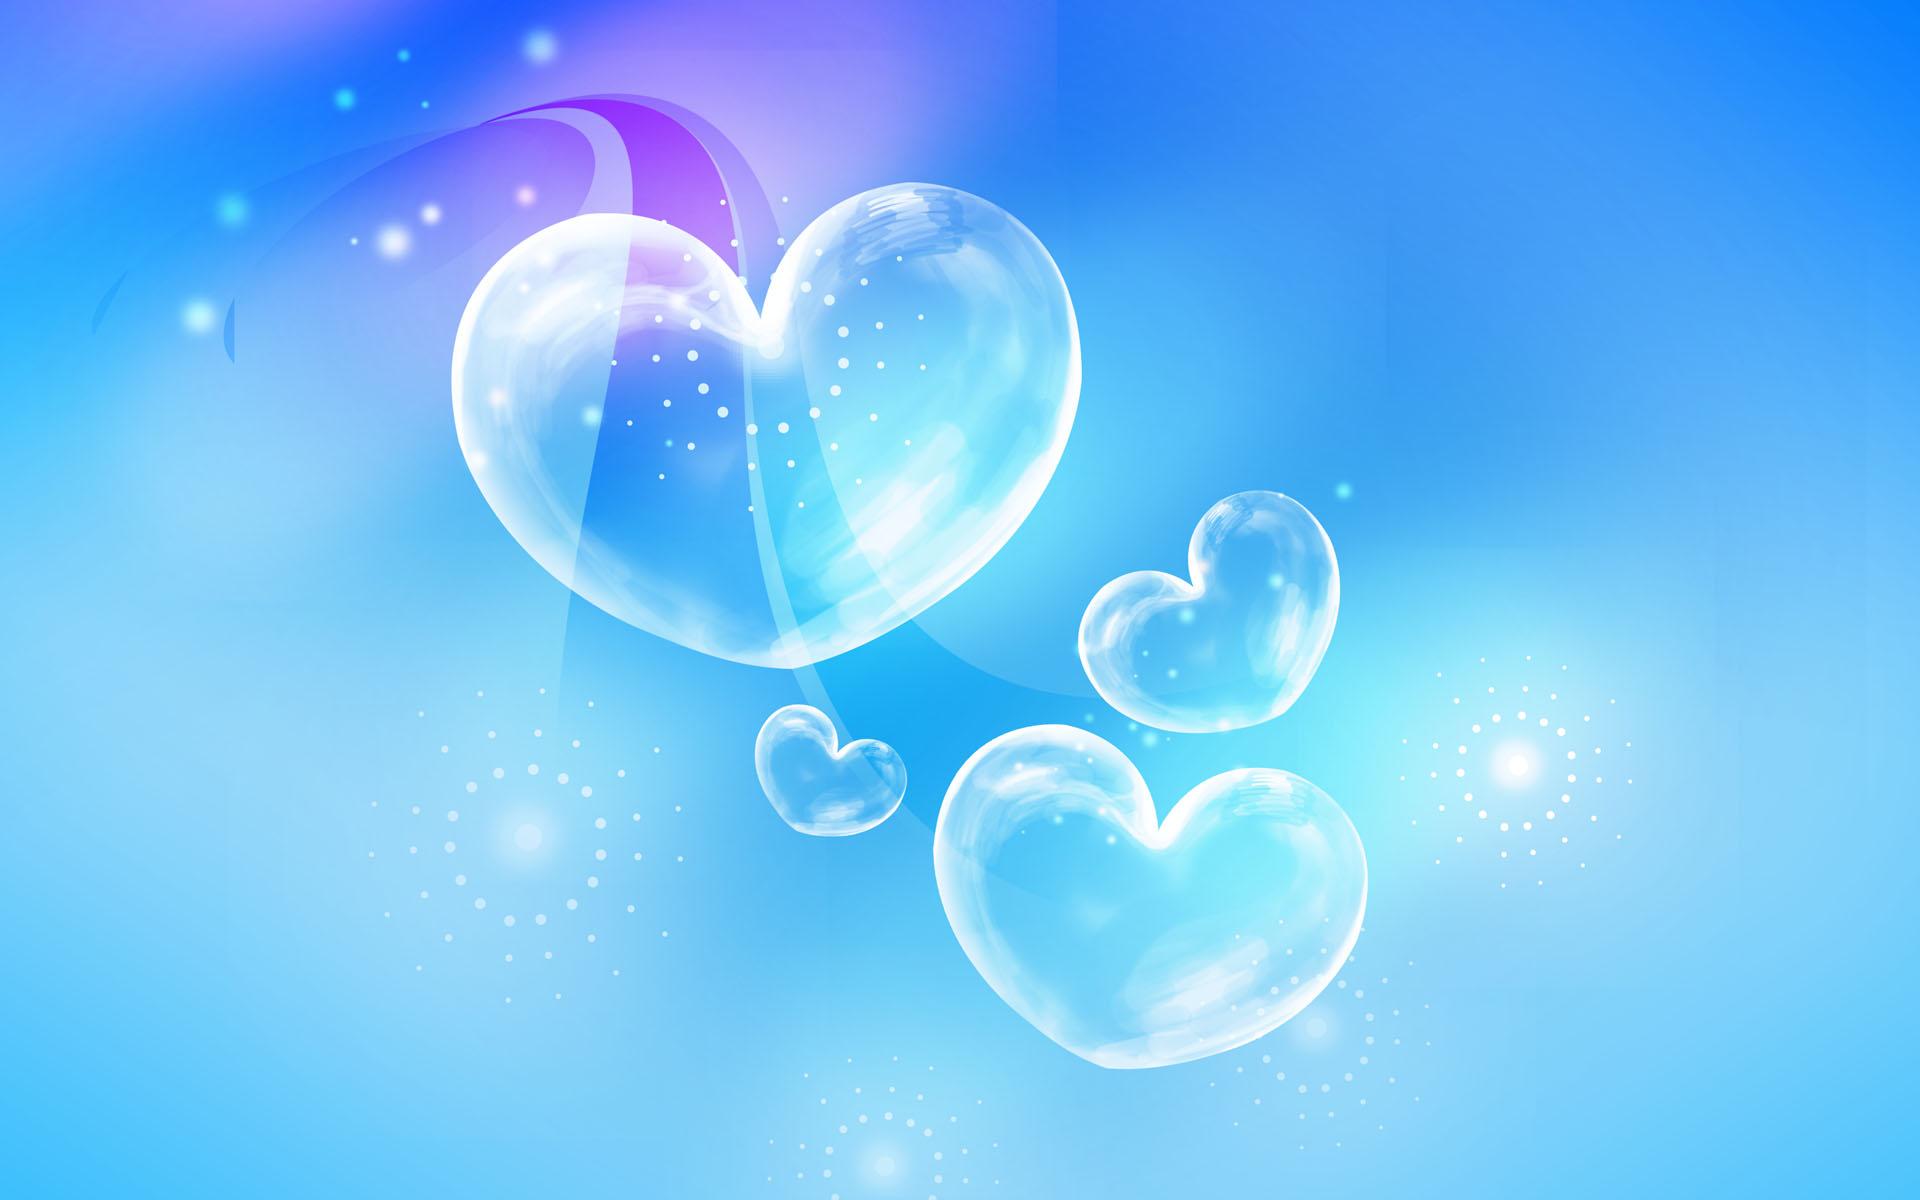 Crystal Clear Hearts Is A Great Wallpaper For Your Puter Desktop